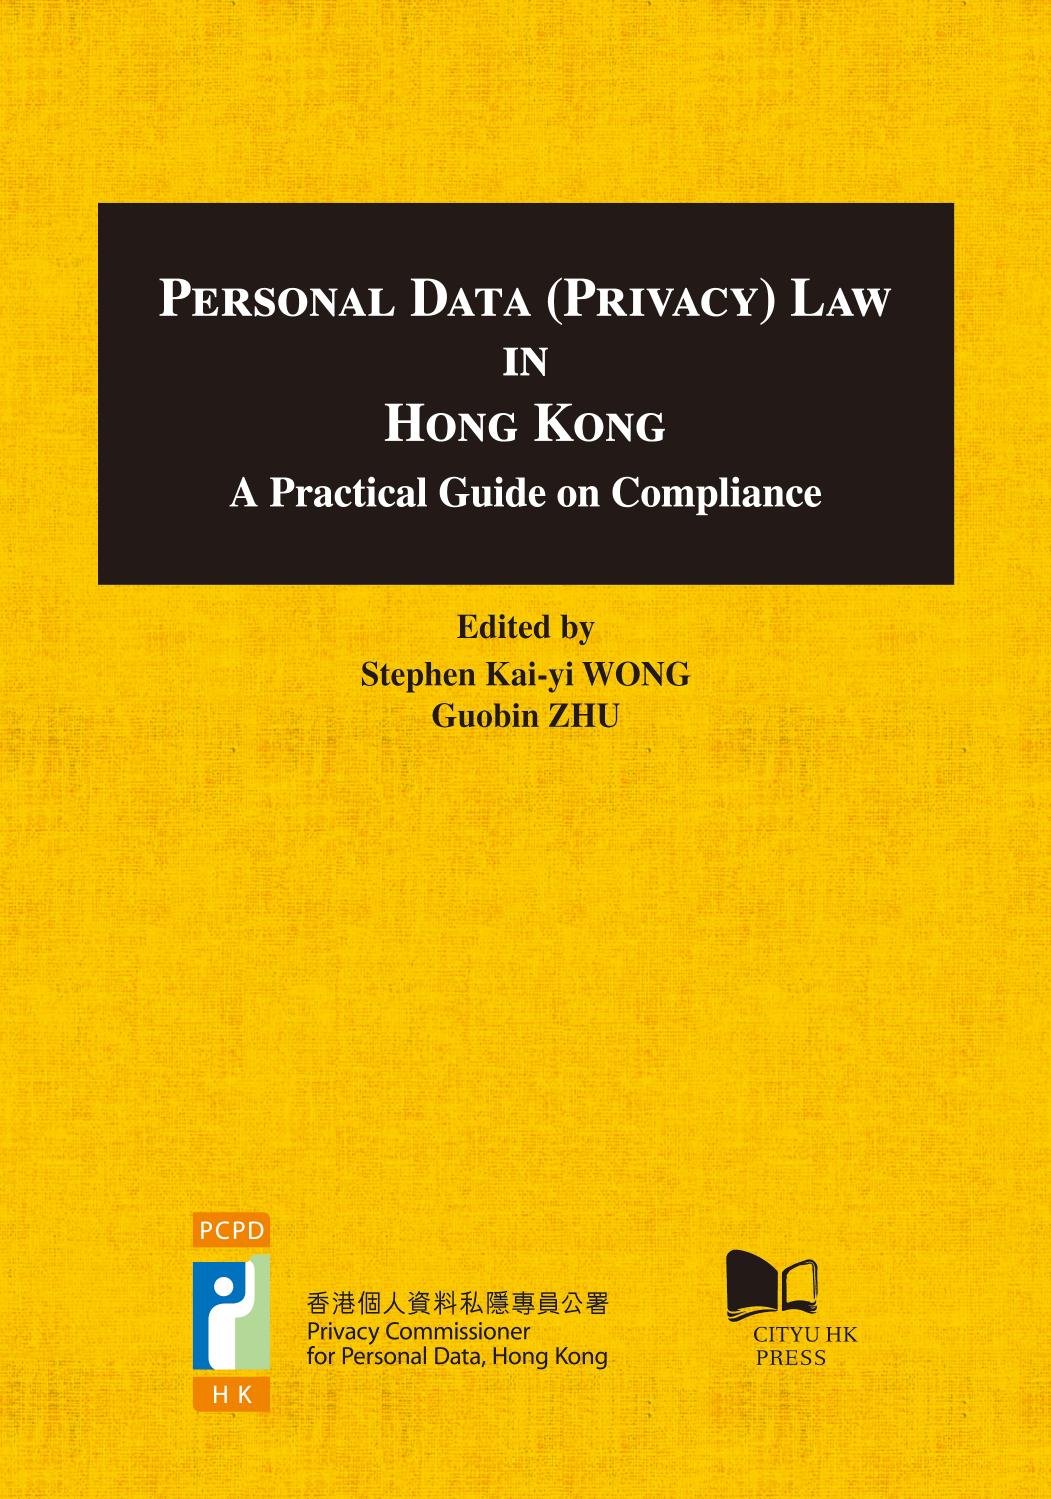 Personal Data (Privacy) Law in Hong Kong- A Practical Guide on Compliance by Stephen Kai-yi Wong